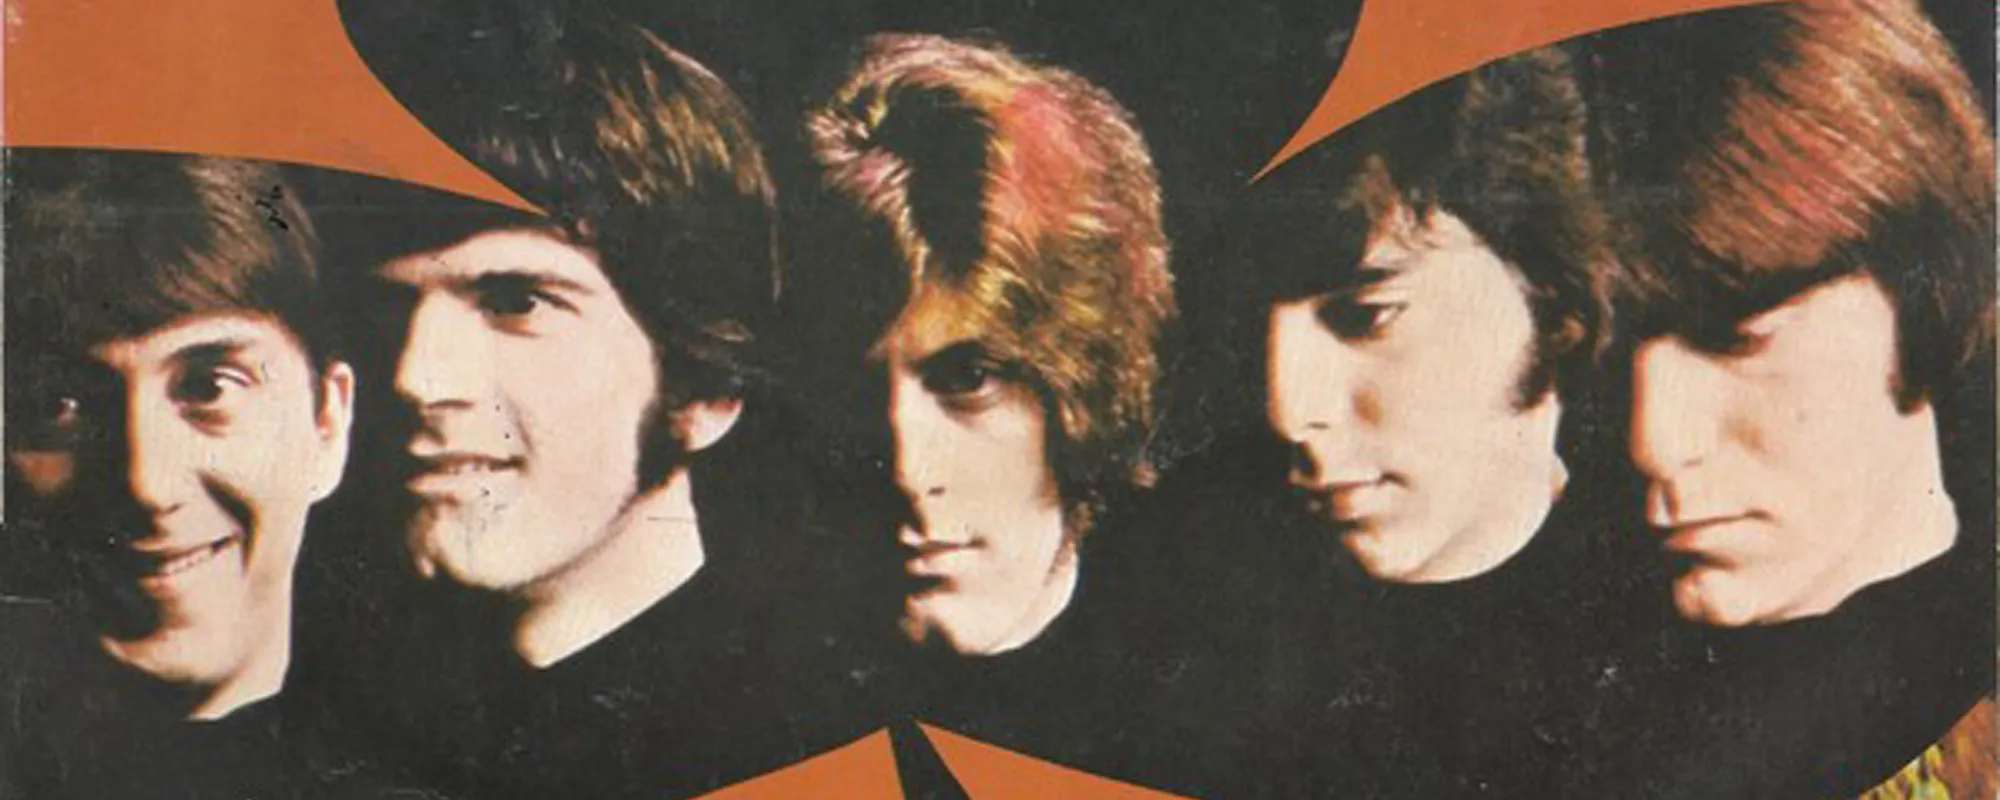 Behind The Song: “Crystal Blue Persuasion” by Tommy James & The Shondells